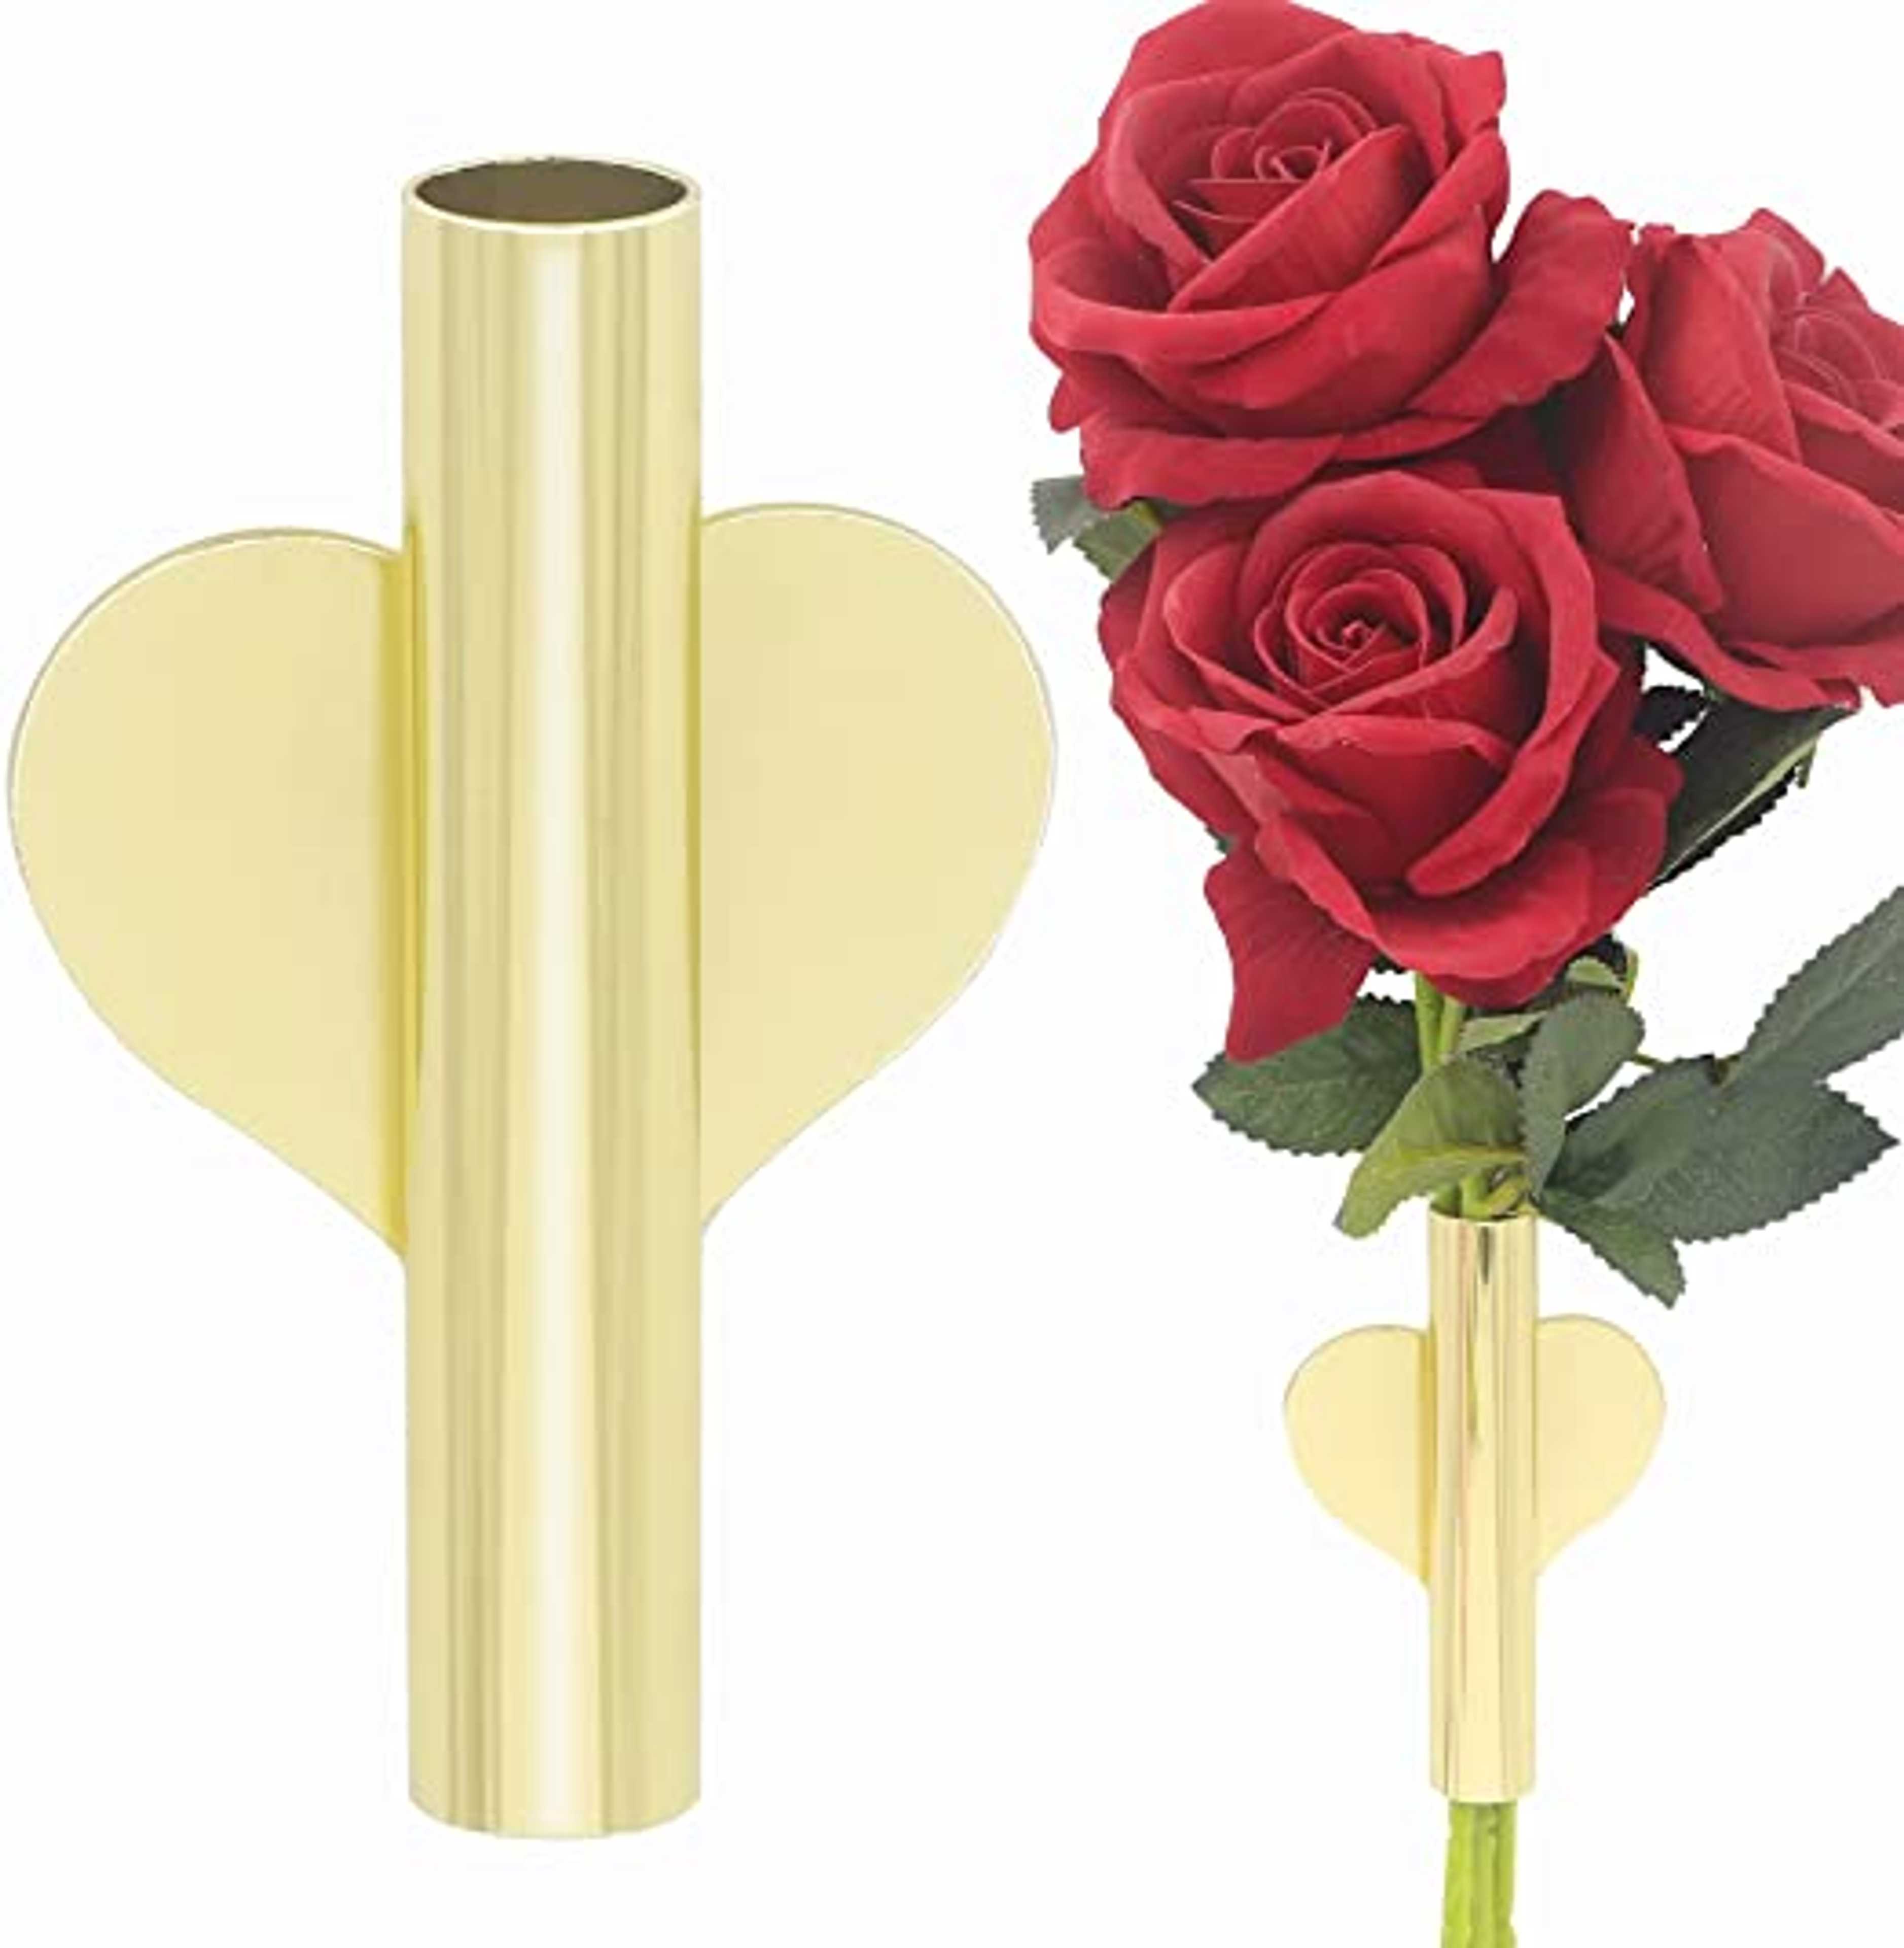 Wall Flower and Plants Vase, Flower Display Holder for Wedding, Decorative Hanging Vase for Fridge,Window,Home,Party, Outdoor, 2 Pack (Gold)